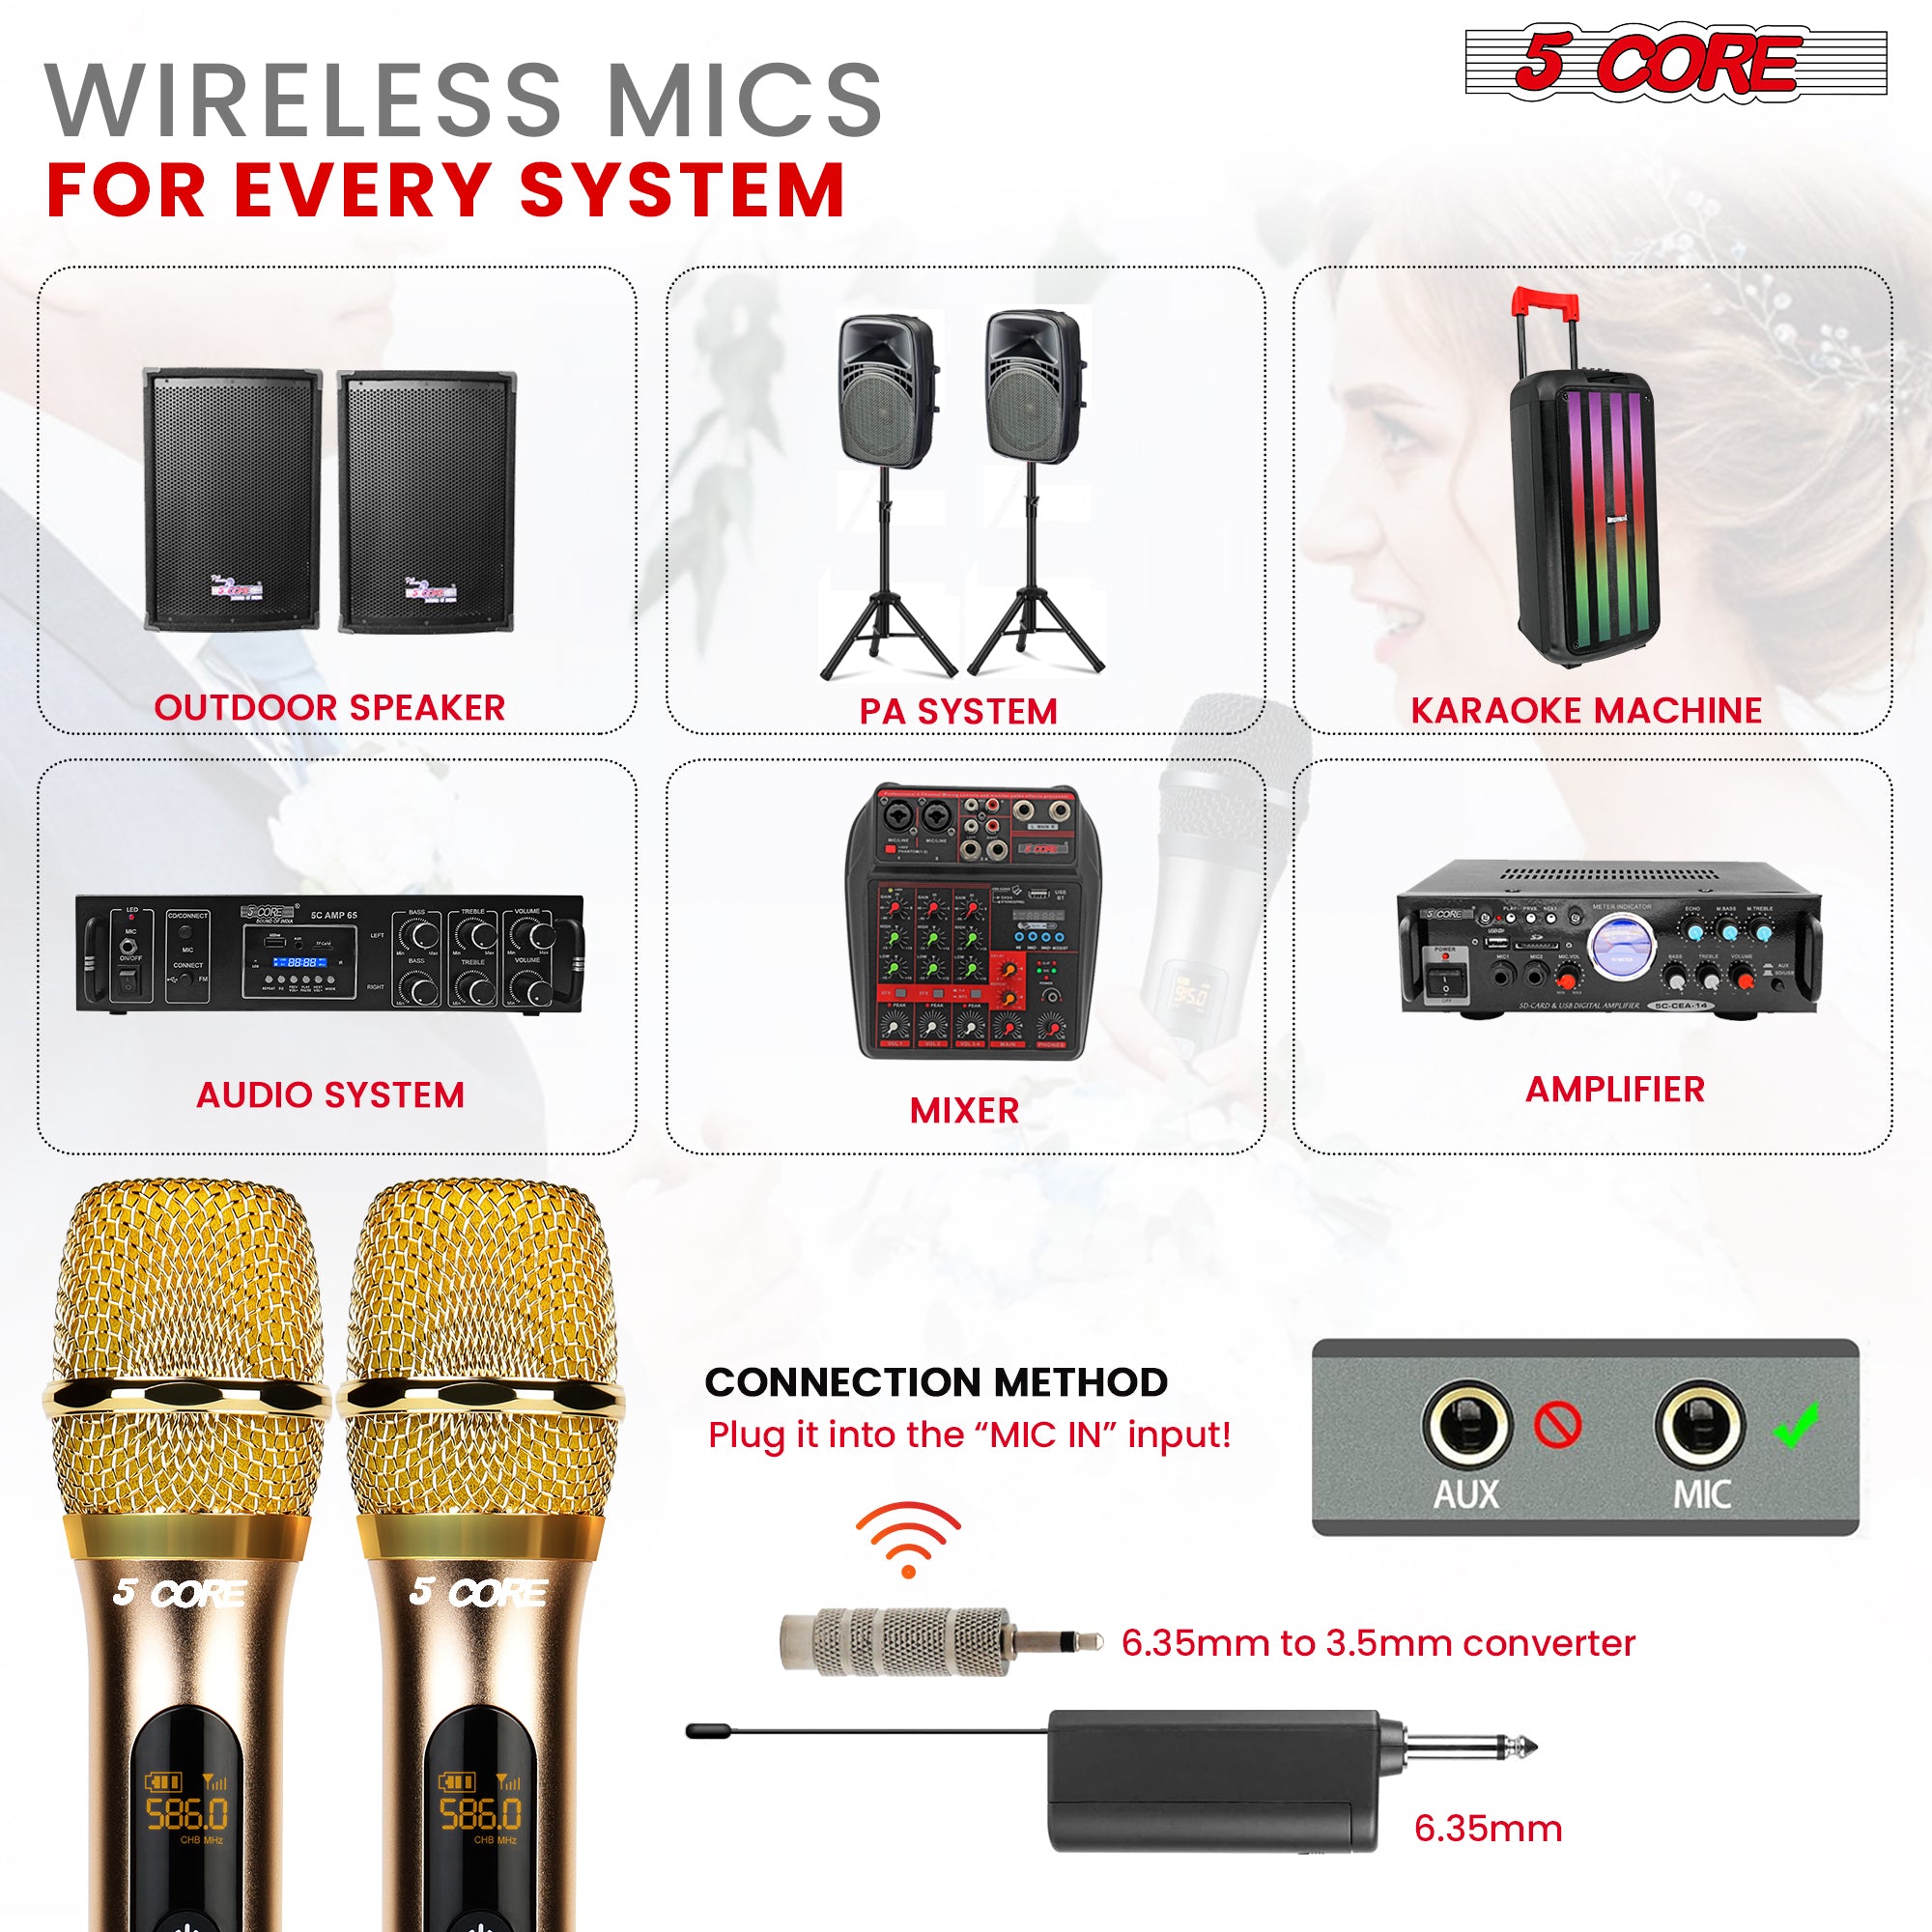 wireless mics for every system